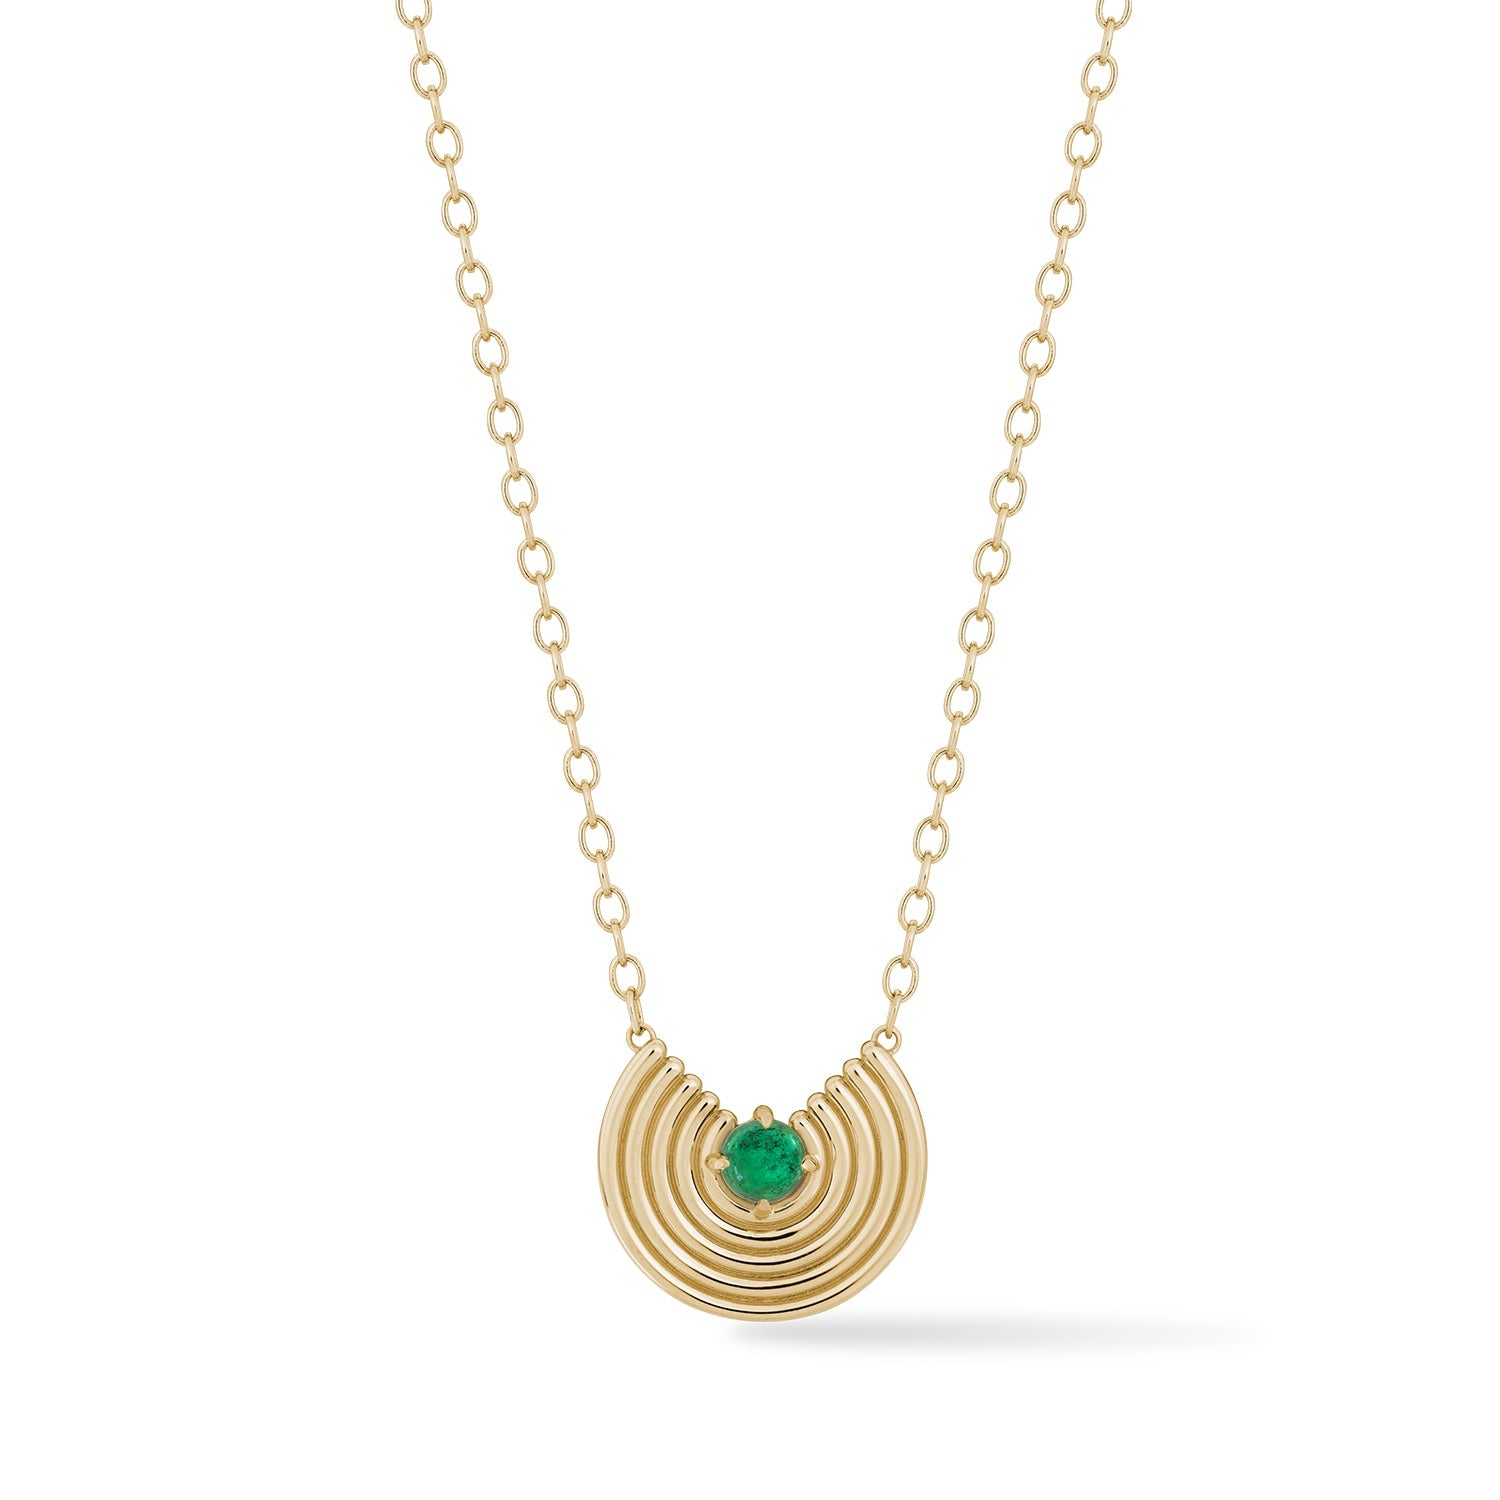 Grand Revival Necklace Emerald - ParkFord